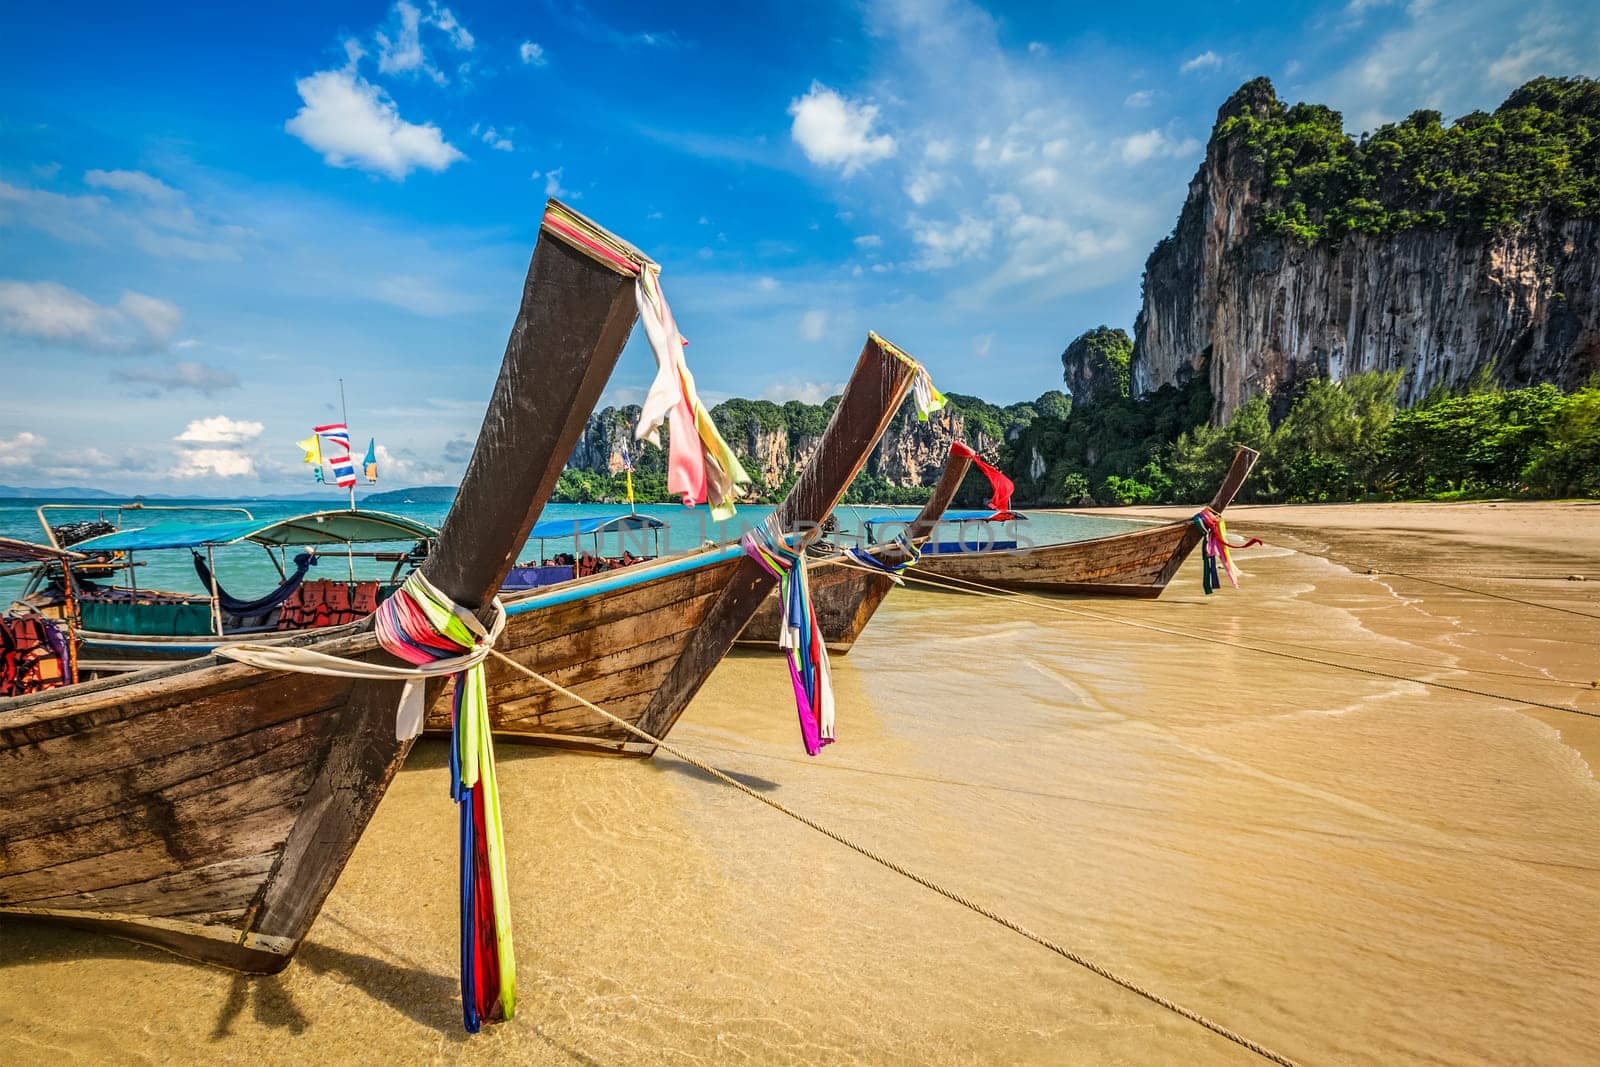 Long tail boats on beach, Thailand by dimol